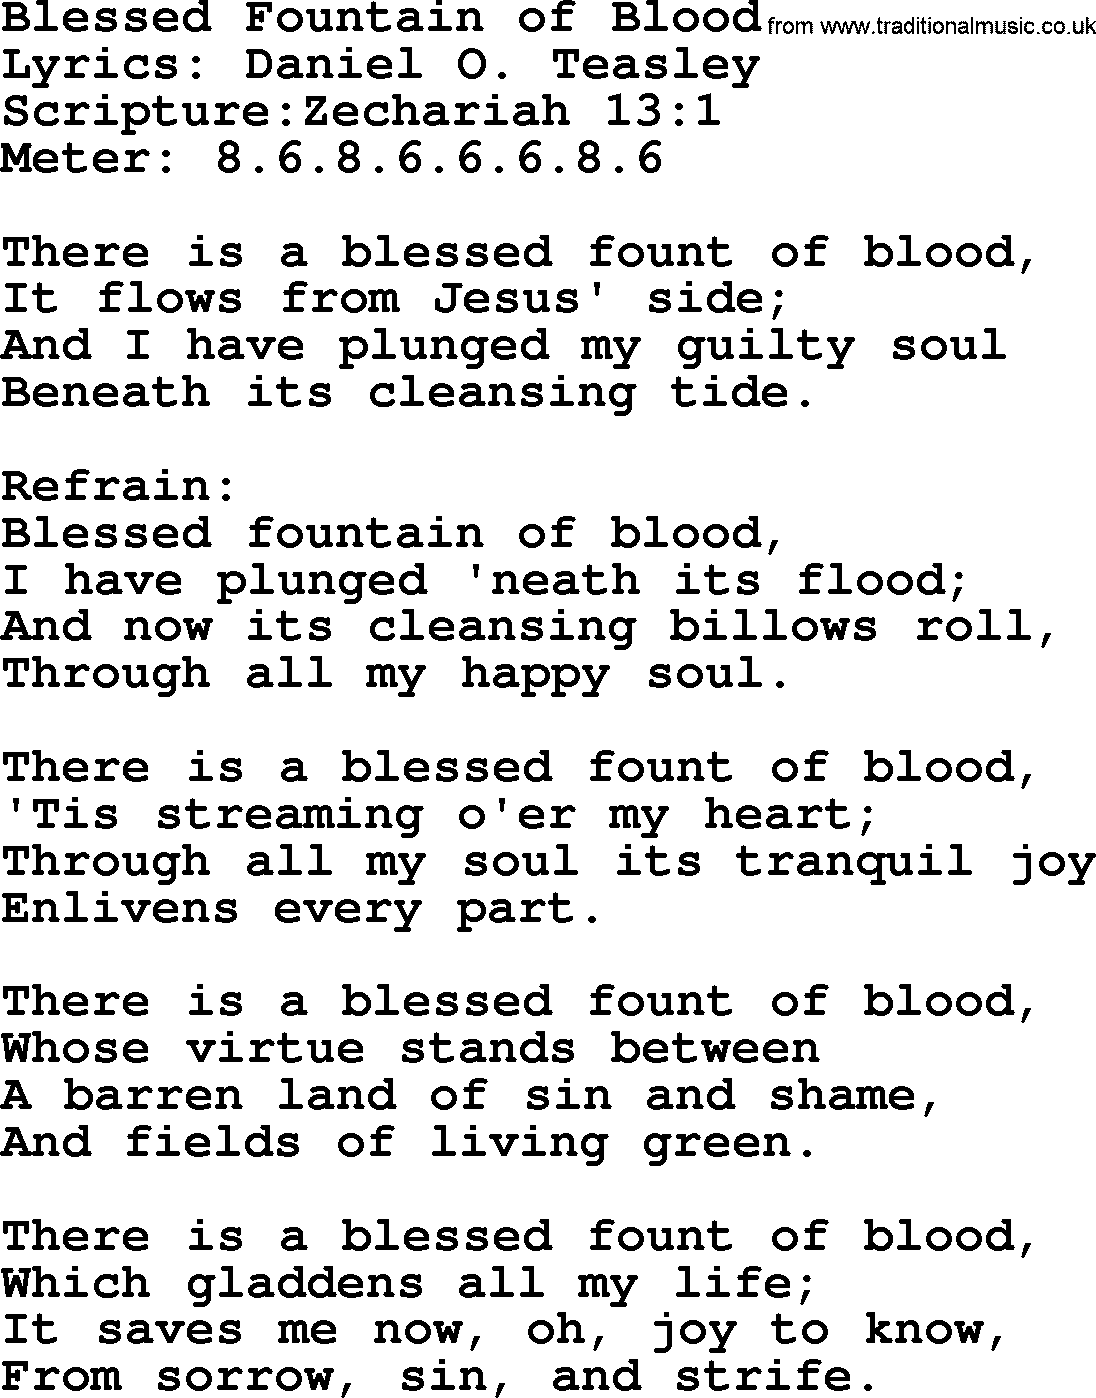 Hymns about  Angels, Hymn: Blessed Fountain of Blood, lyrics, sheet music, midi & Mp3 music with PDF